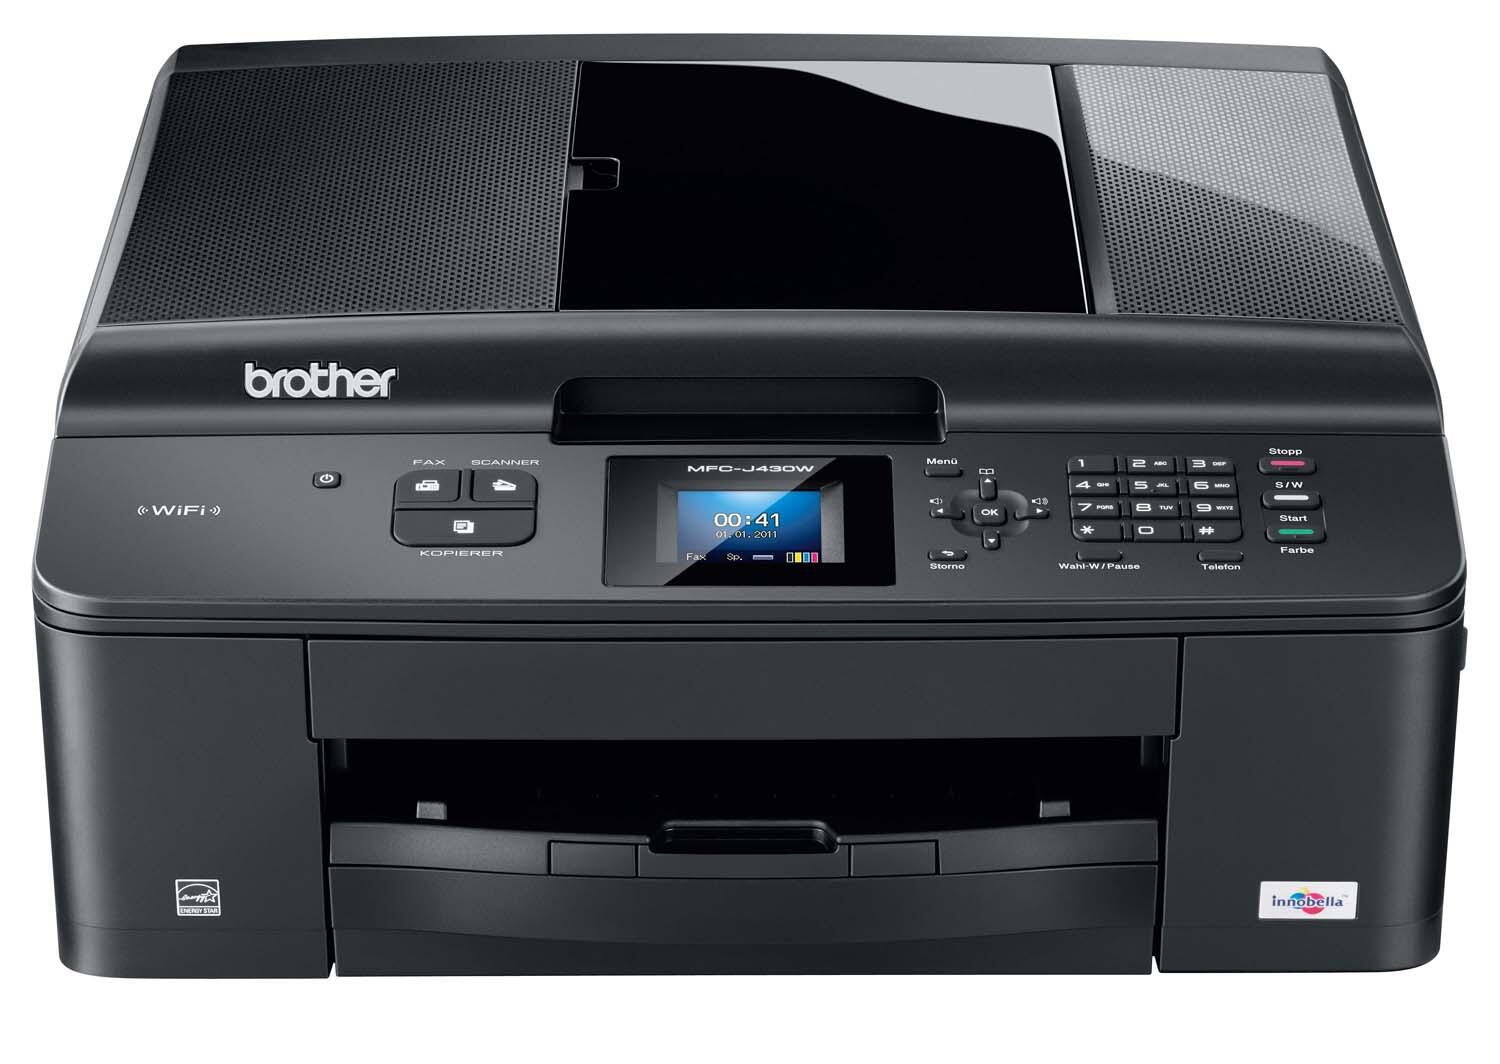 Brother MFC-J 430 W